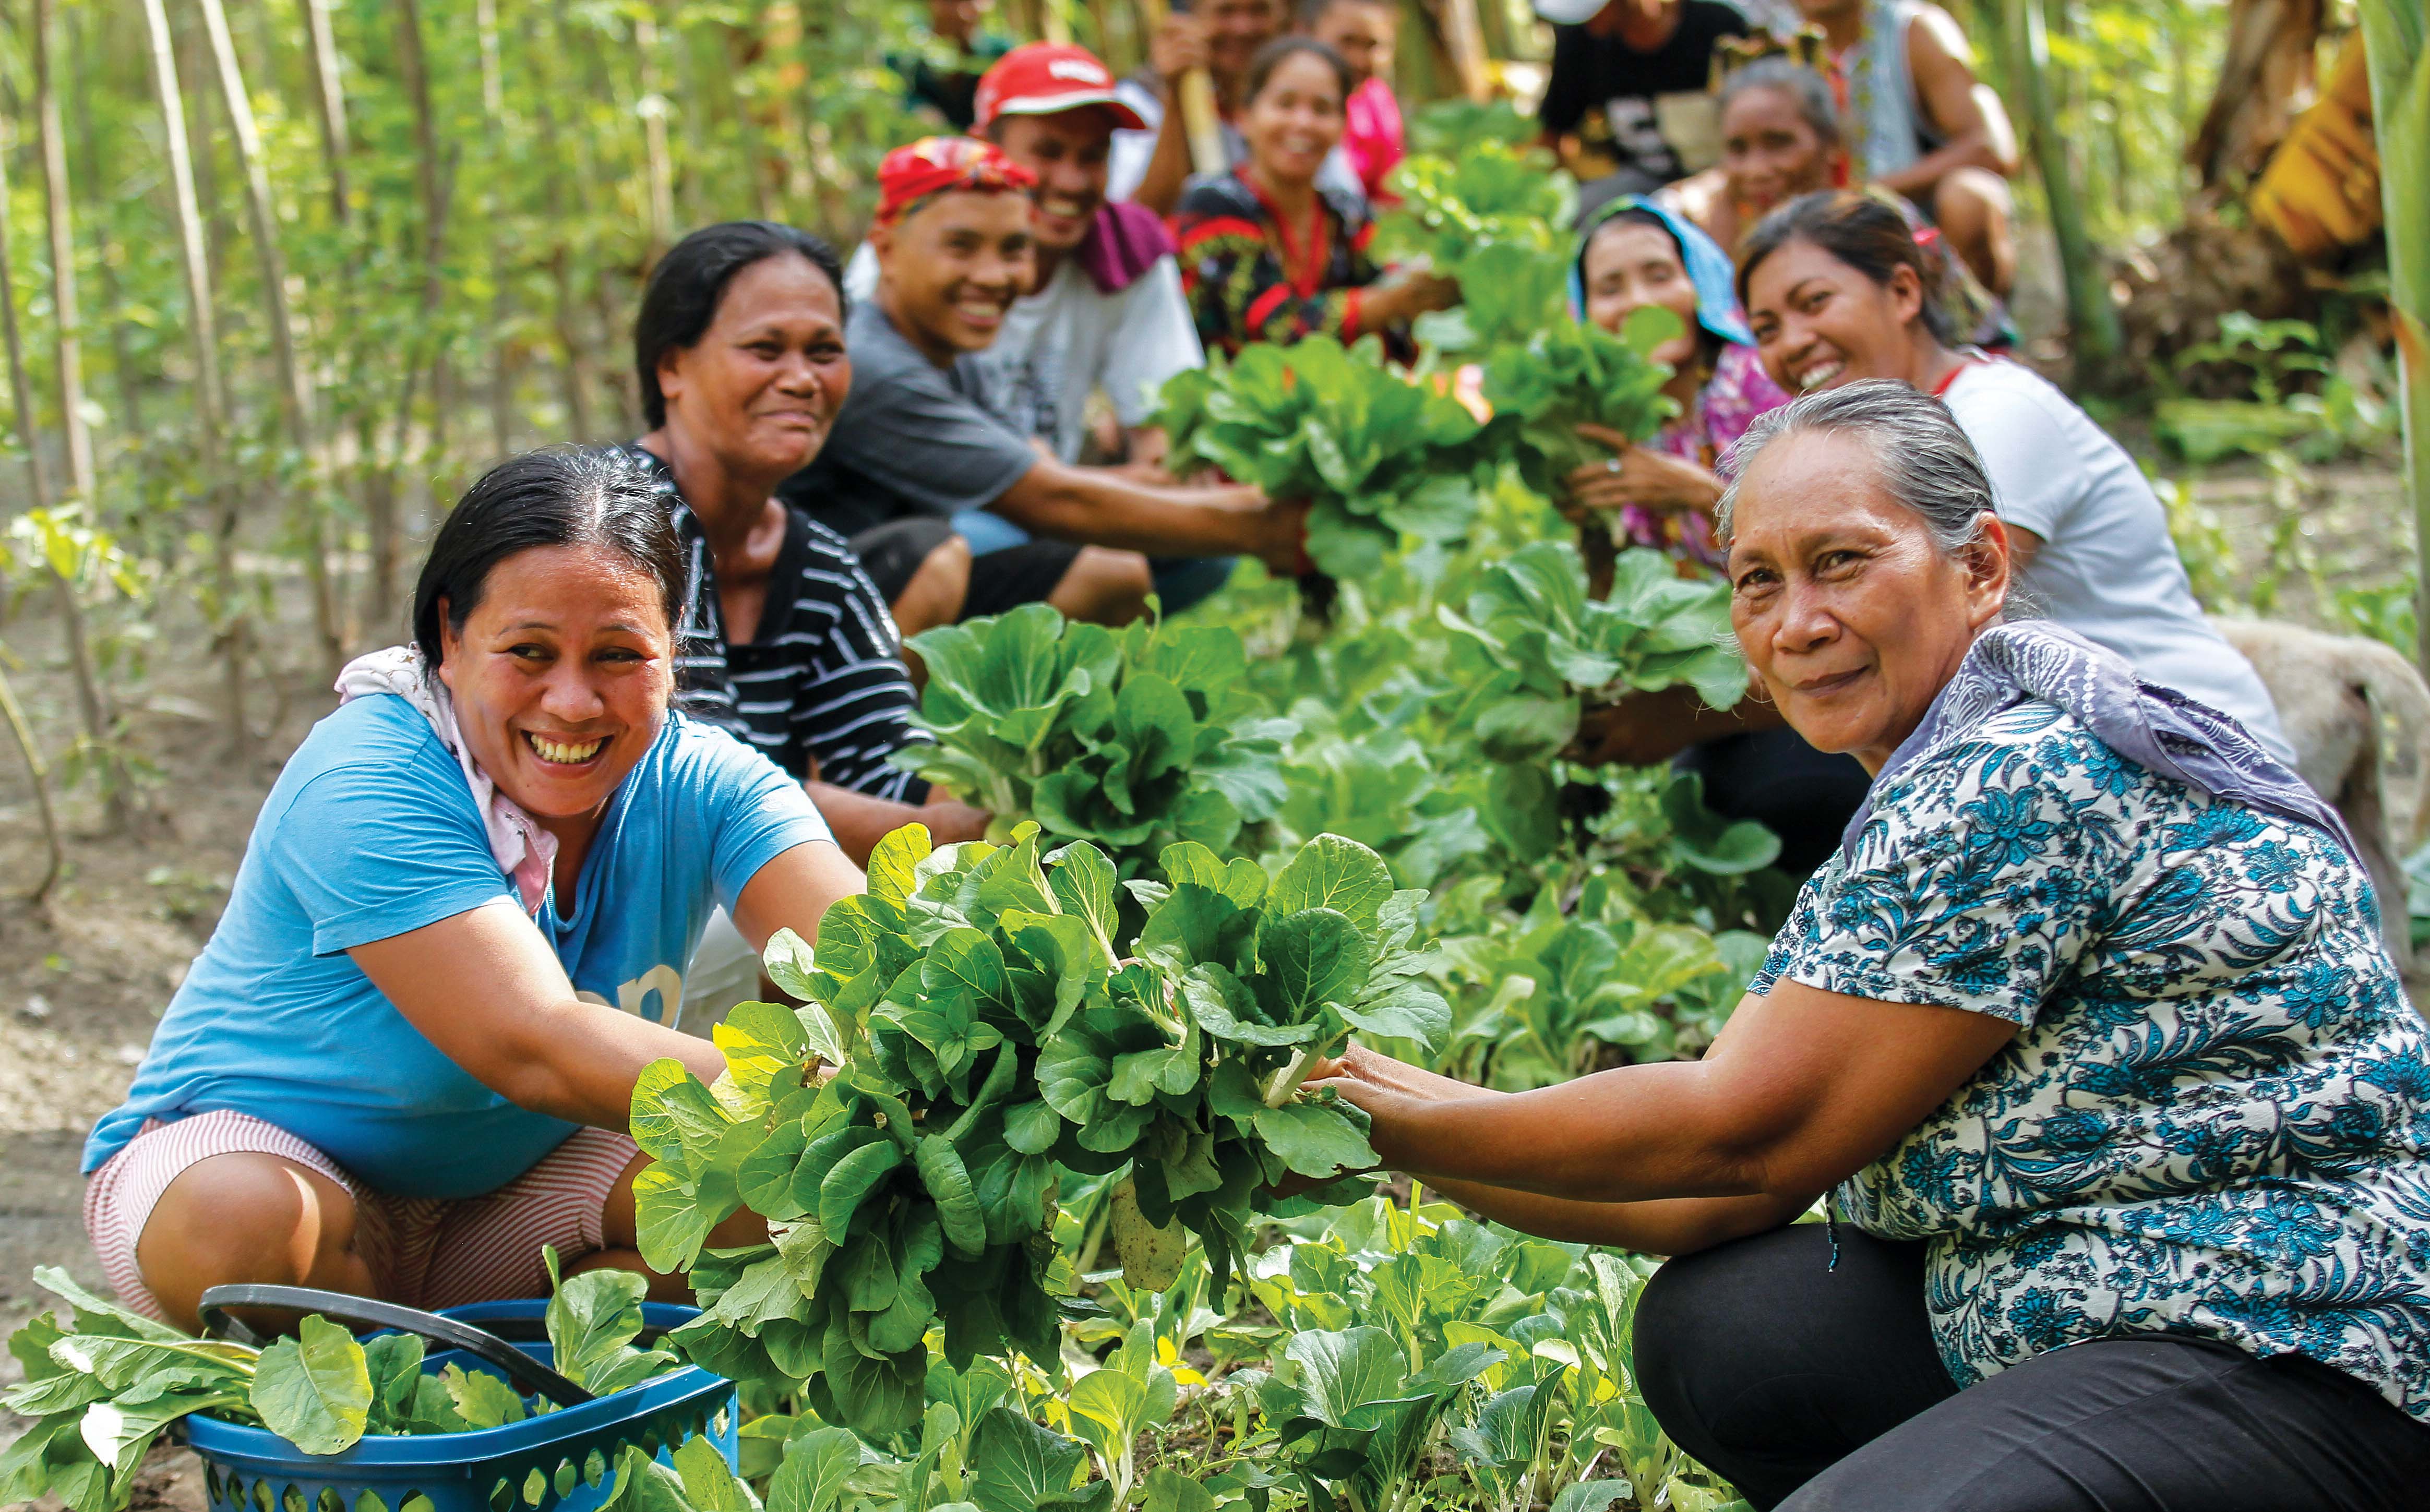 a group of women and men happily tend to growing vegetables. They are outdoors, and are crouched down in two long rows.